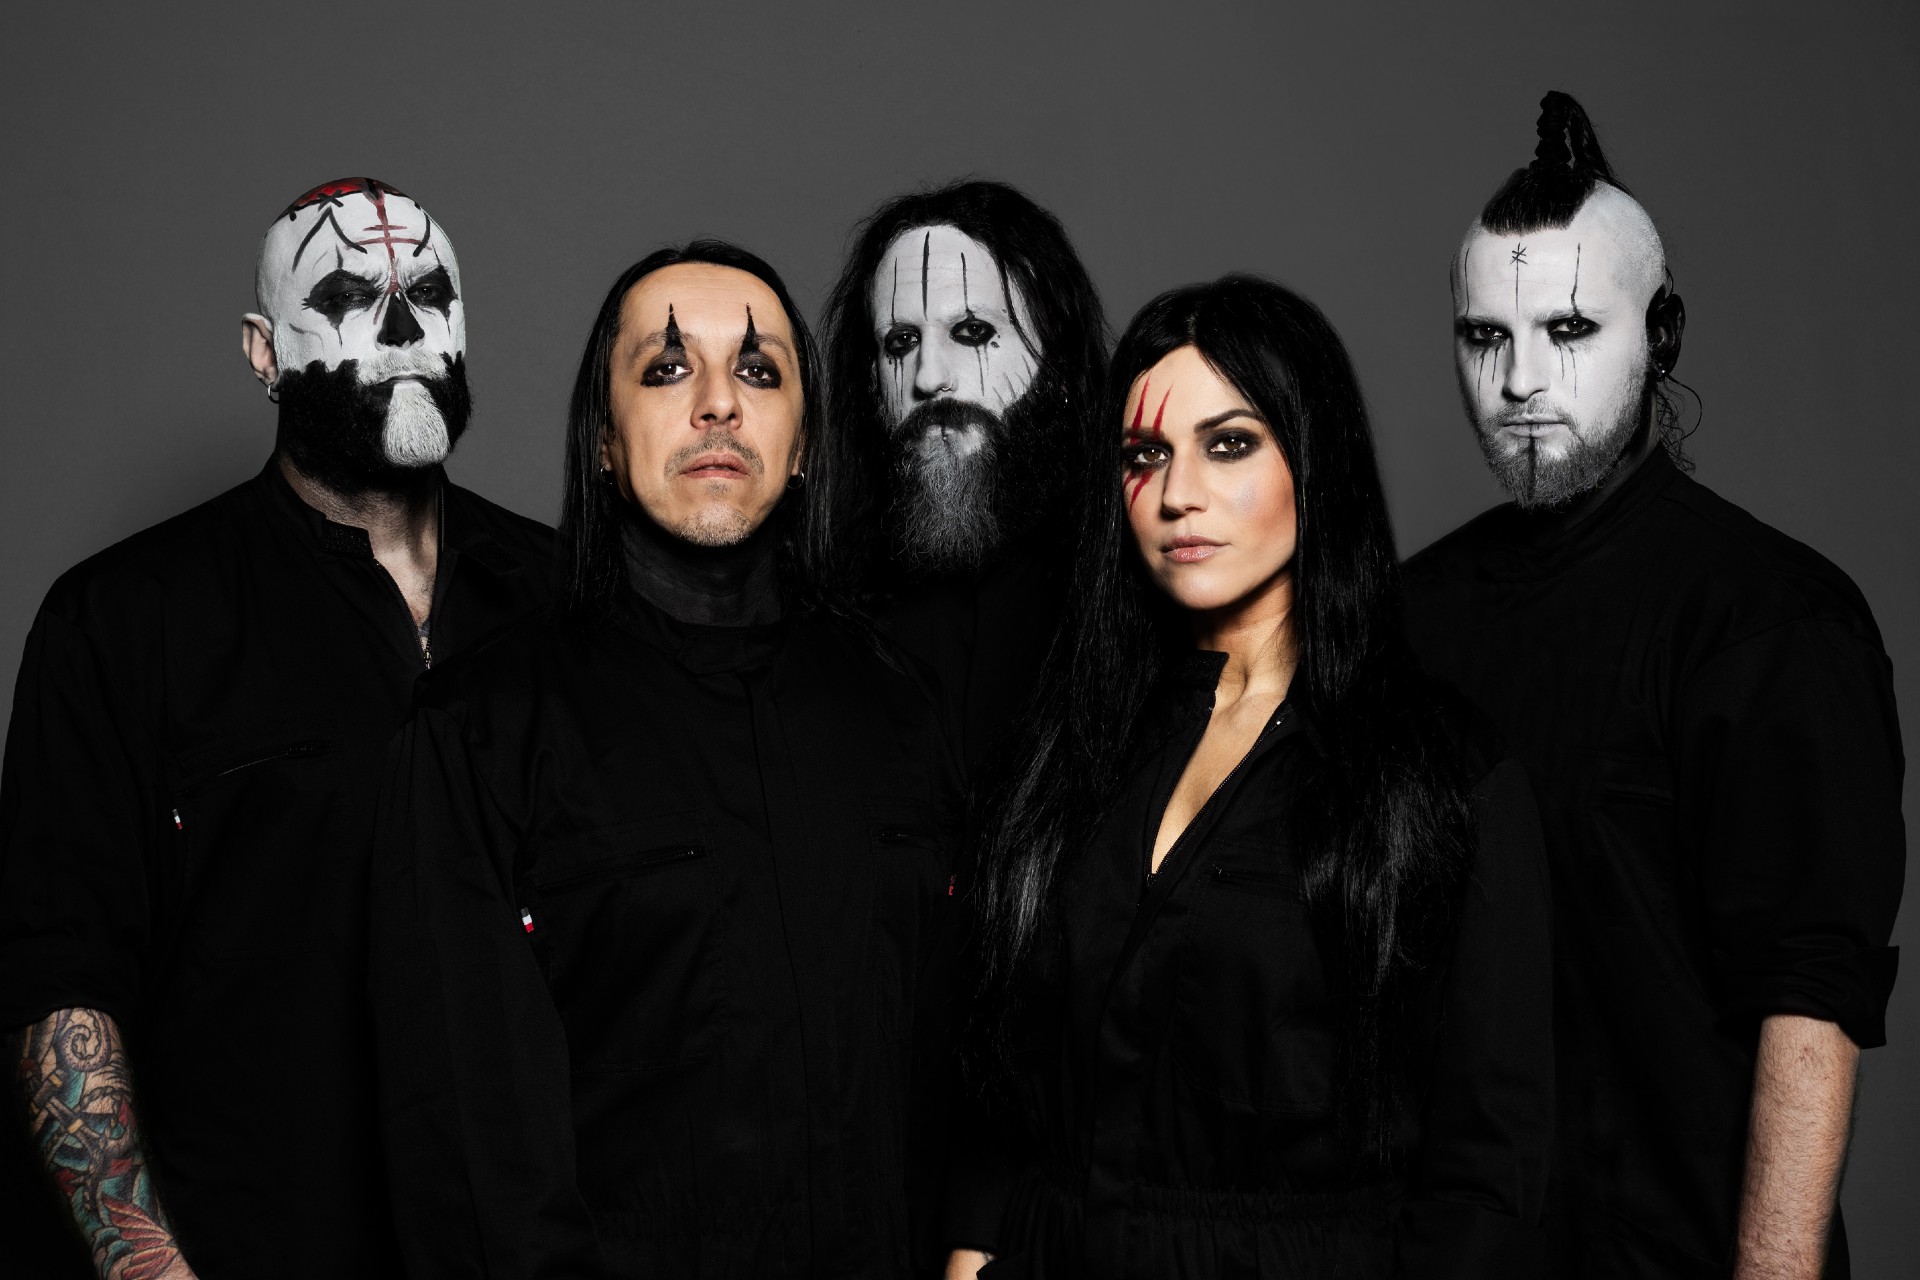 Lacuna Coil, photo by Patric Ullaeus